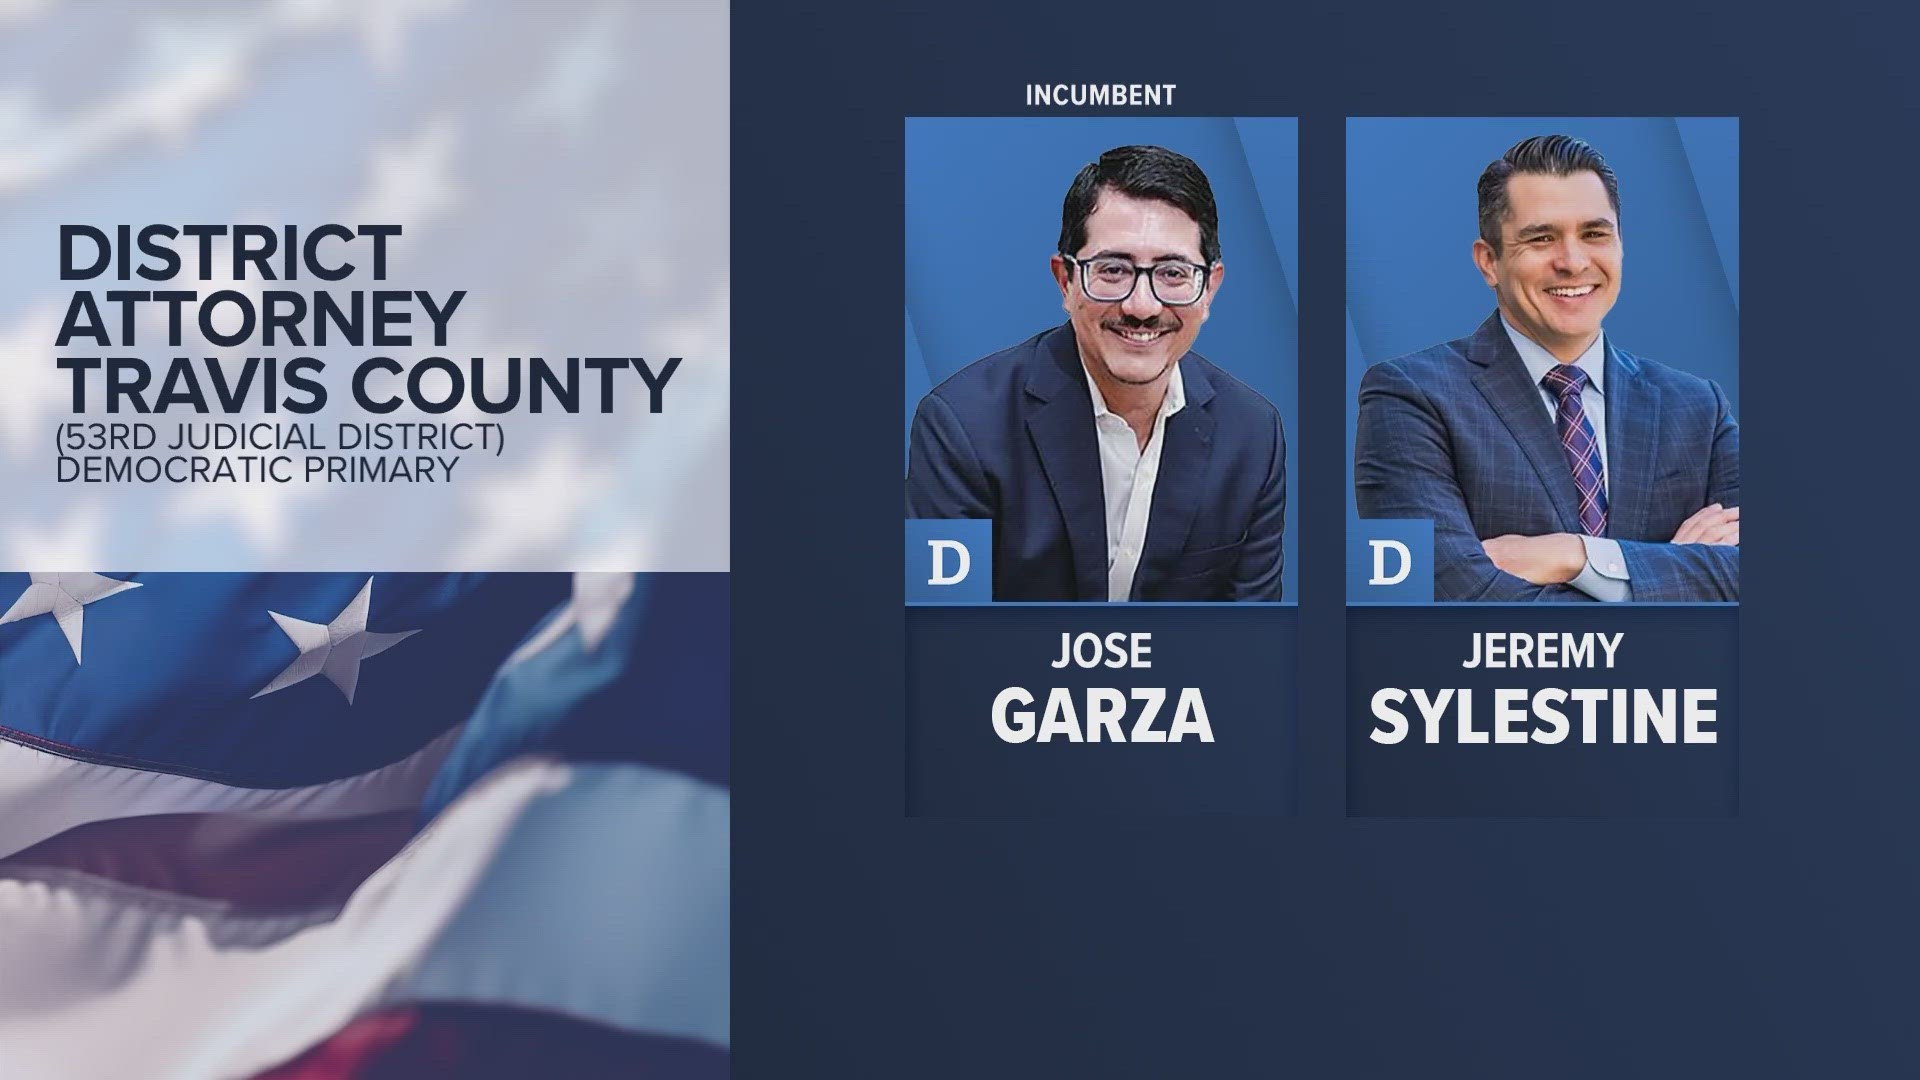 The candidate who wins in the March primary often wins in November. That's expected to be the case in the Travis County District Attorney's race.